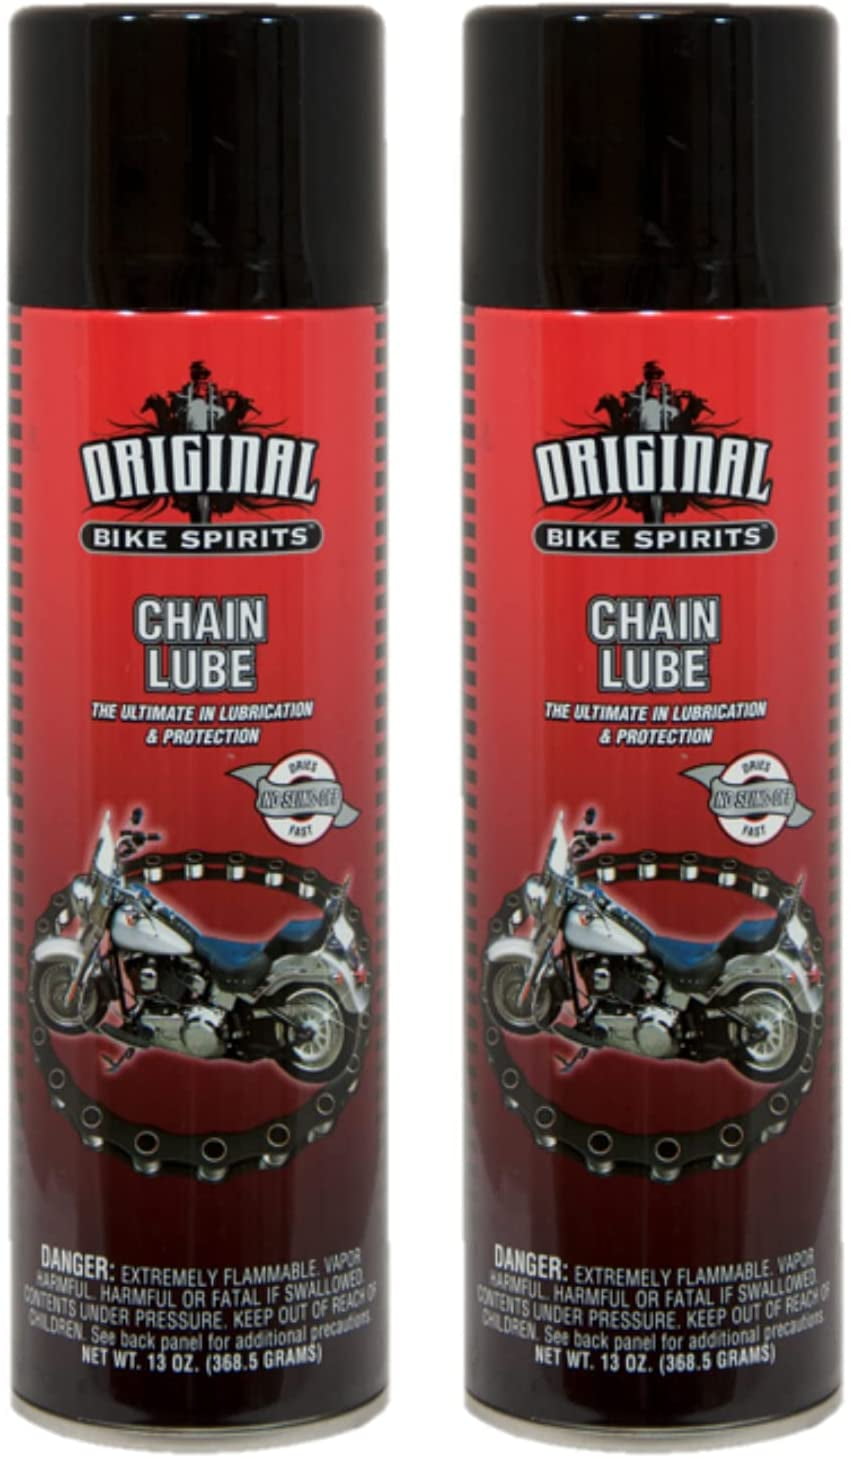 Original Bike Spirits Carb Cleaner 12 Ounce (Pack of 2)